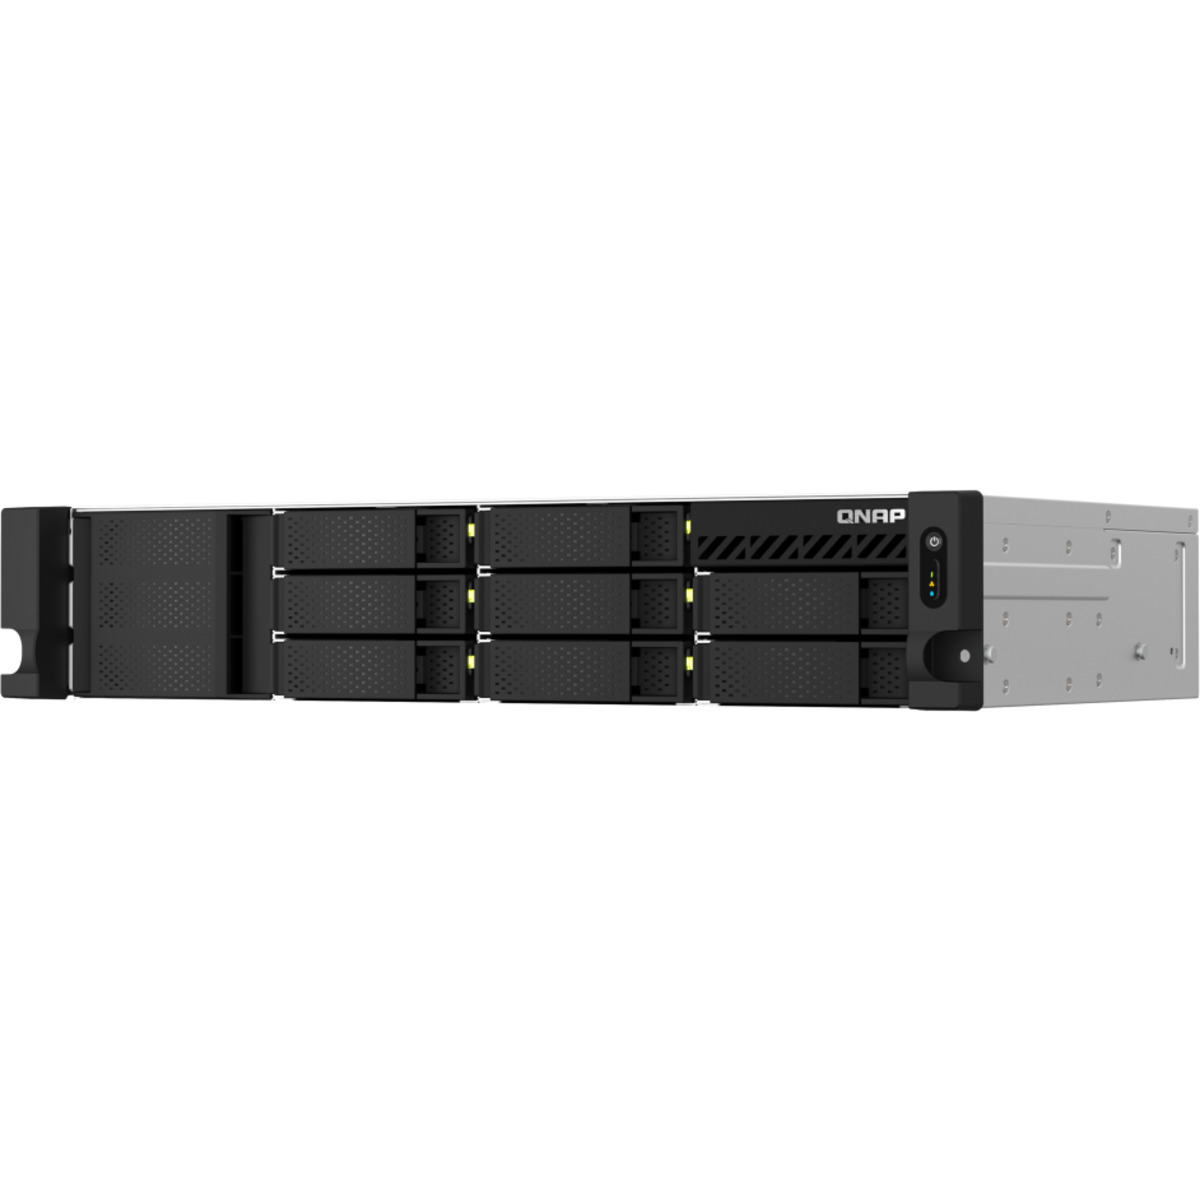 buy QNAP TS-864eU-RP 80tb RackMount NAS - Network Attached Storage Device 8x10000gb Seagate IronWolf Pro ST10000NT001 3.5 7200rpm SATA 6Gb/s HDD NAS Class Drives Installed - Burn-In Tested - ON SALE - nas headquarters buy network attached storage server device das new raid-5 free shipping usa spring sale TS-864eU-RP